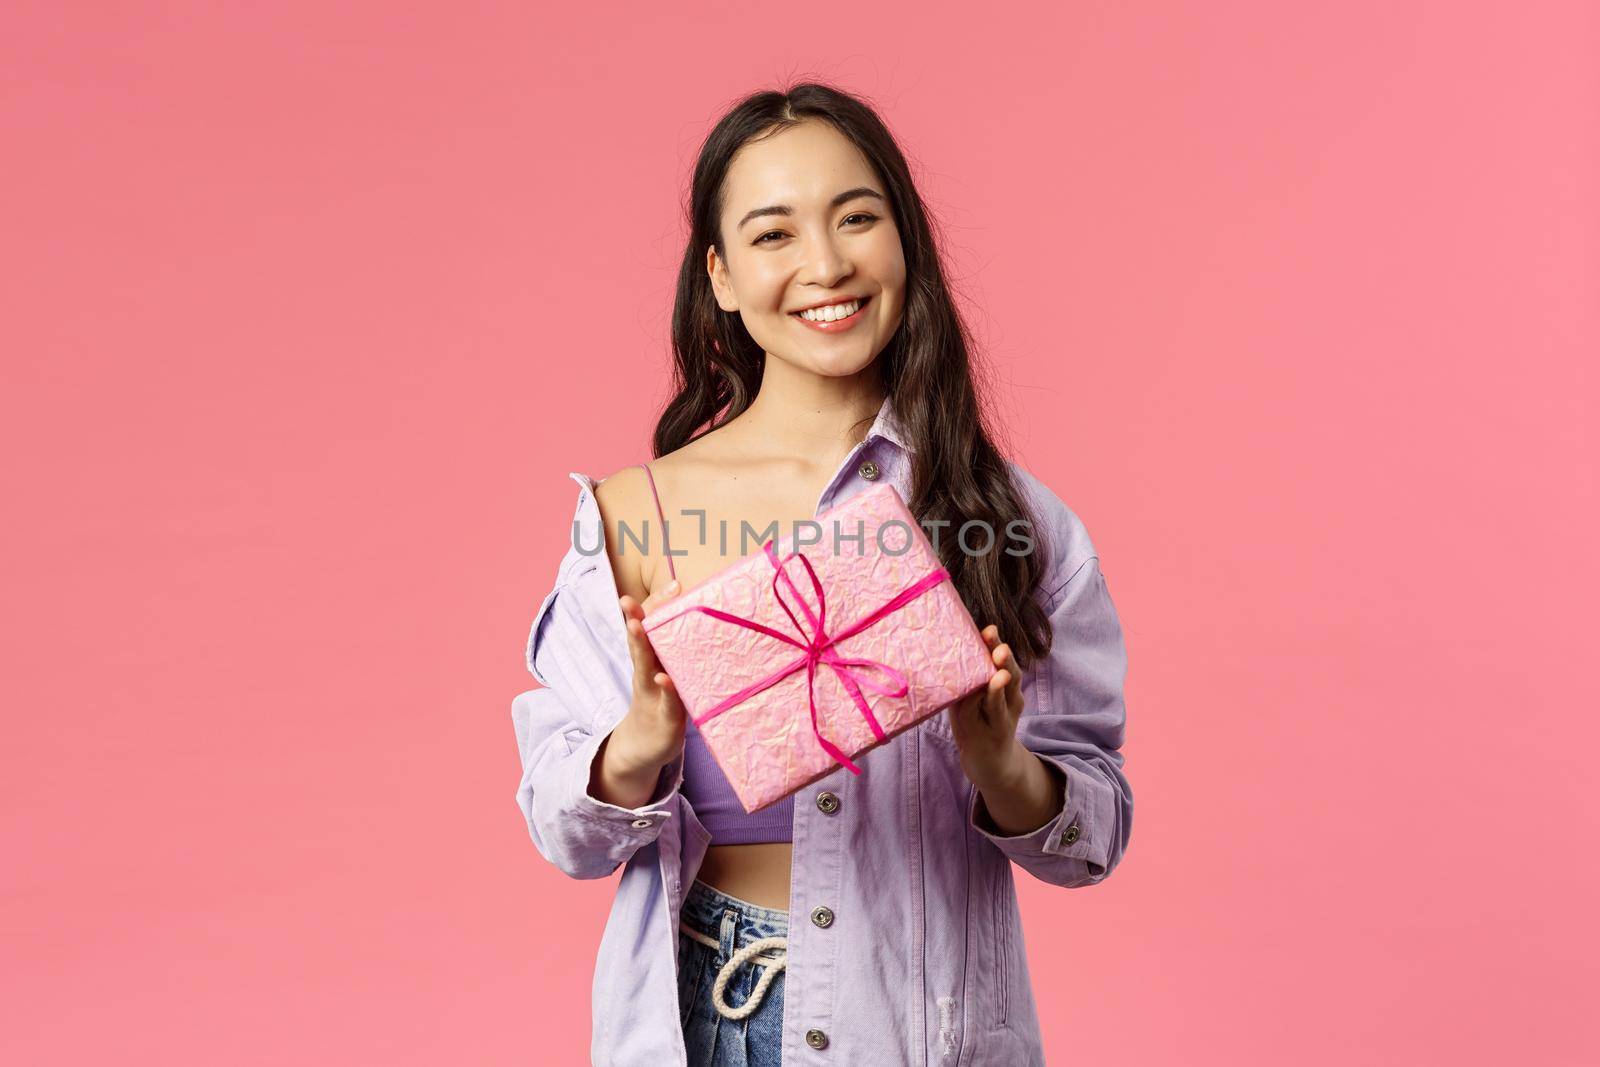 Girl have a present for you. Portrait of stylish pretty young asian female holding wrapped gift box and smiling at camera as being invited to birthday party, standing pink background.